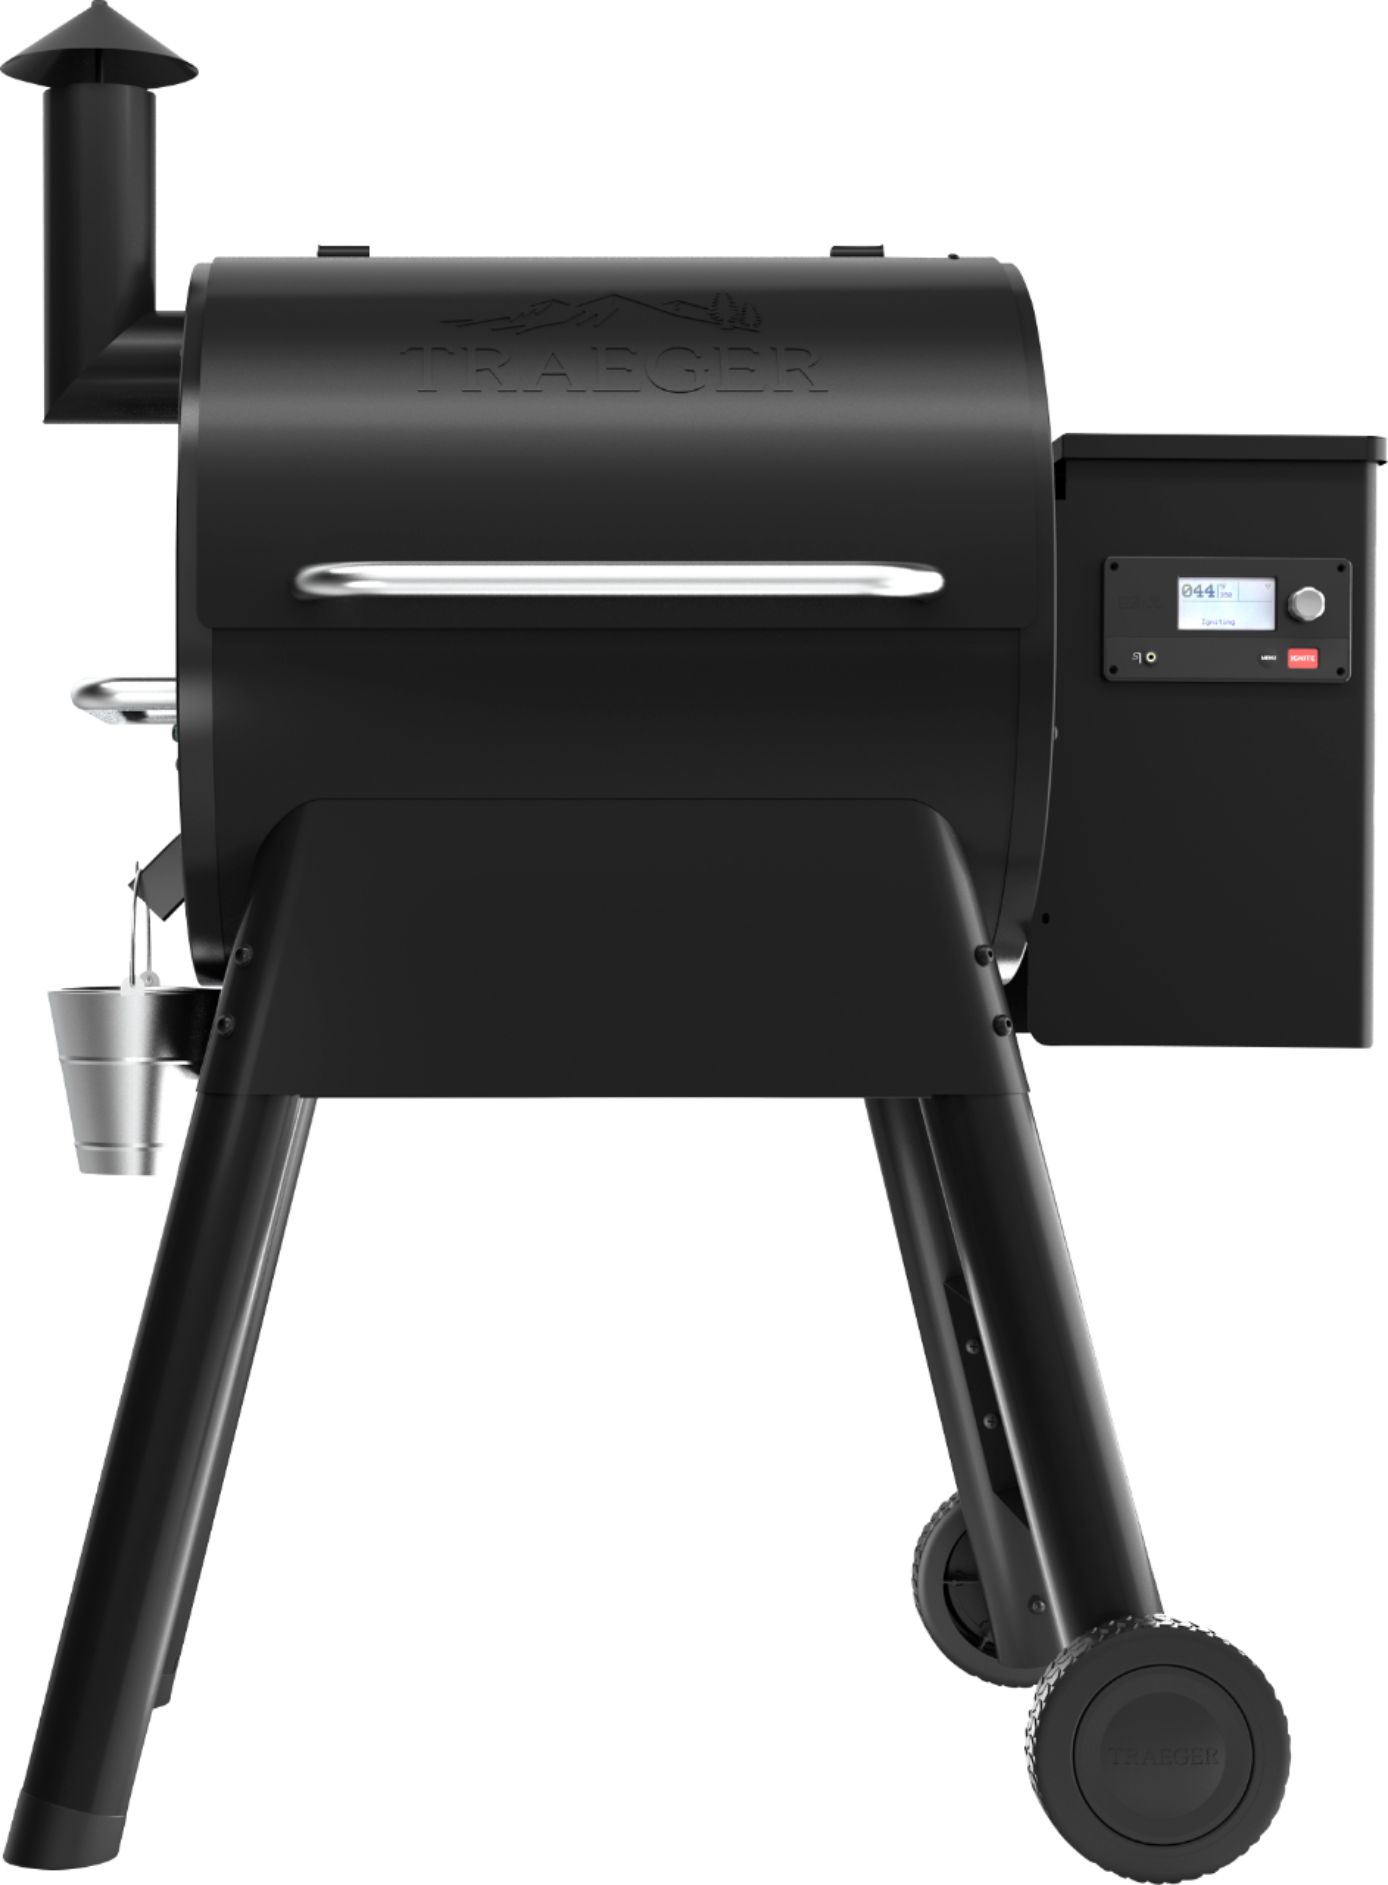 Angle View: Traeger Grills - Pro 575 Pellet Grill and Smoker with WiFIRE - Black